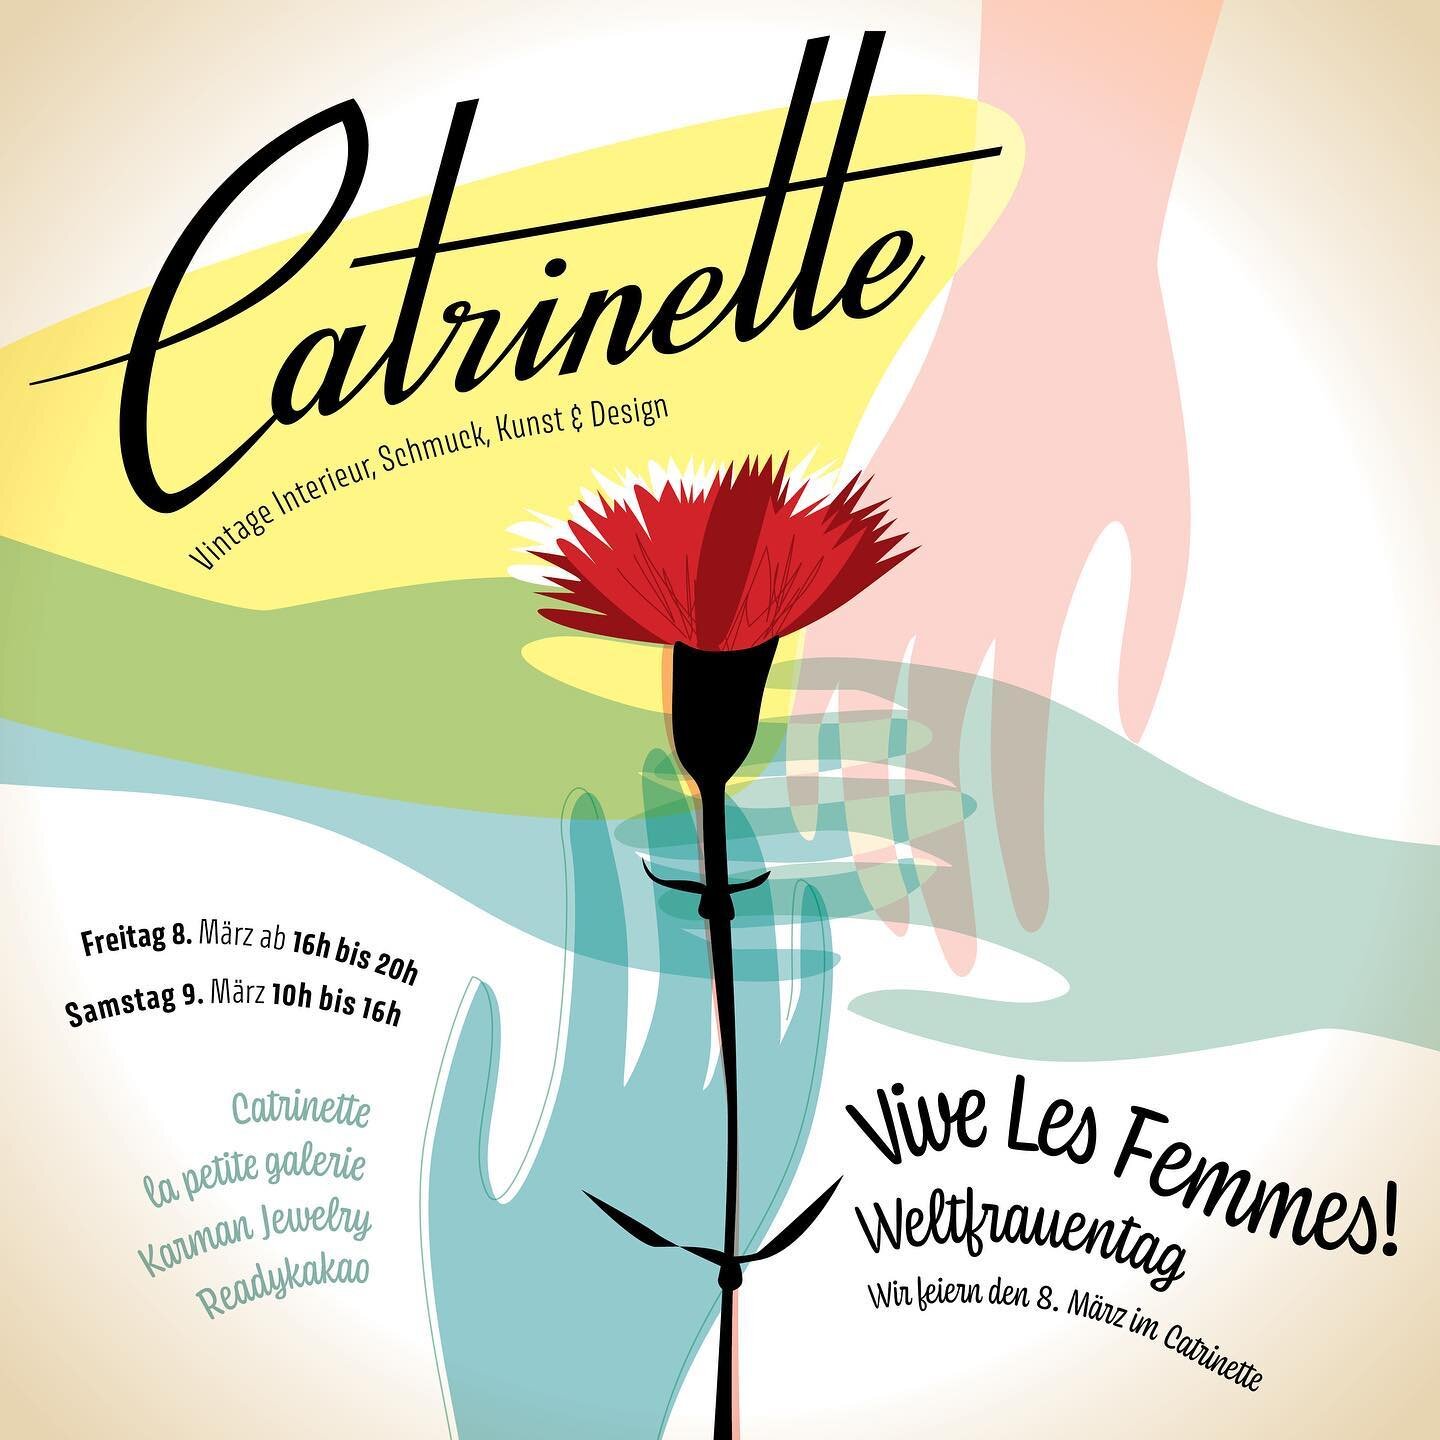 .
.
Join us for a fun and artsy March 8th!!
✨
VIVE LES FEMMES !!
@catrinettewien 
✨
Design &amp; Art Pop Up
Friday, March 8th / 4-8pm
Saturday, March 9th / 10am-4pm

For International Women&rsquo;s Day on March 8, la petite galerie, Karman Jewelry an